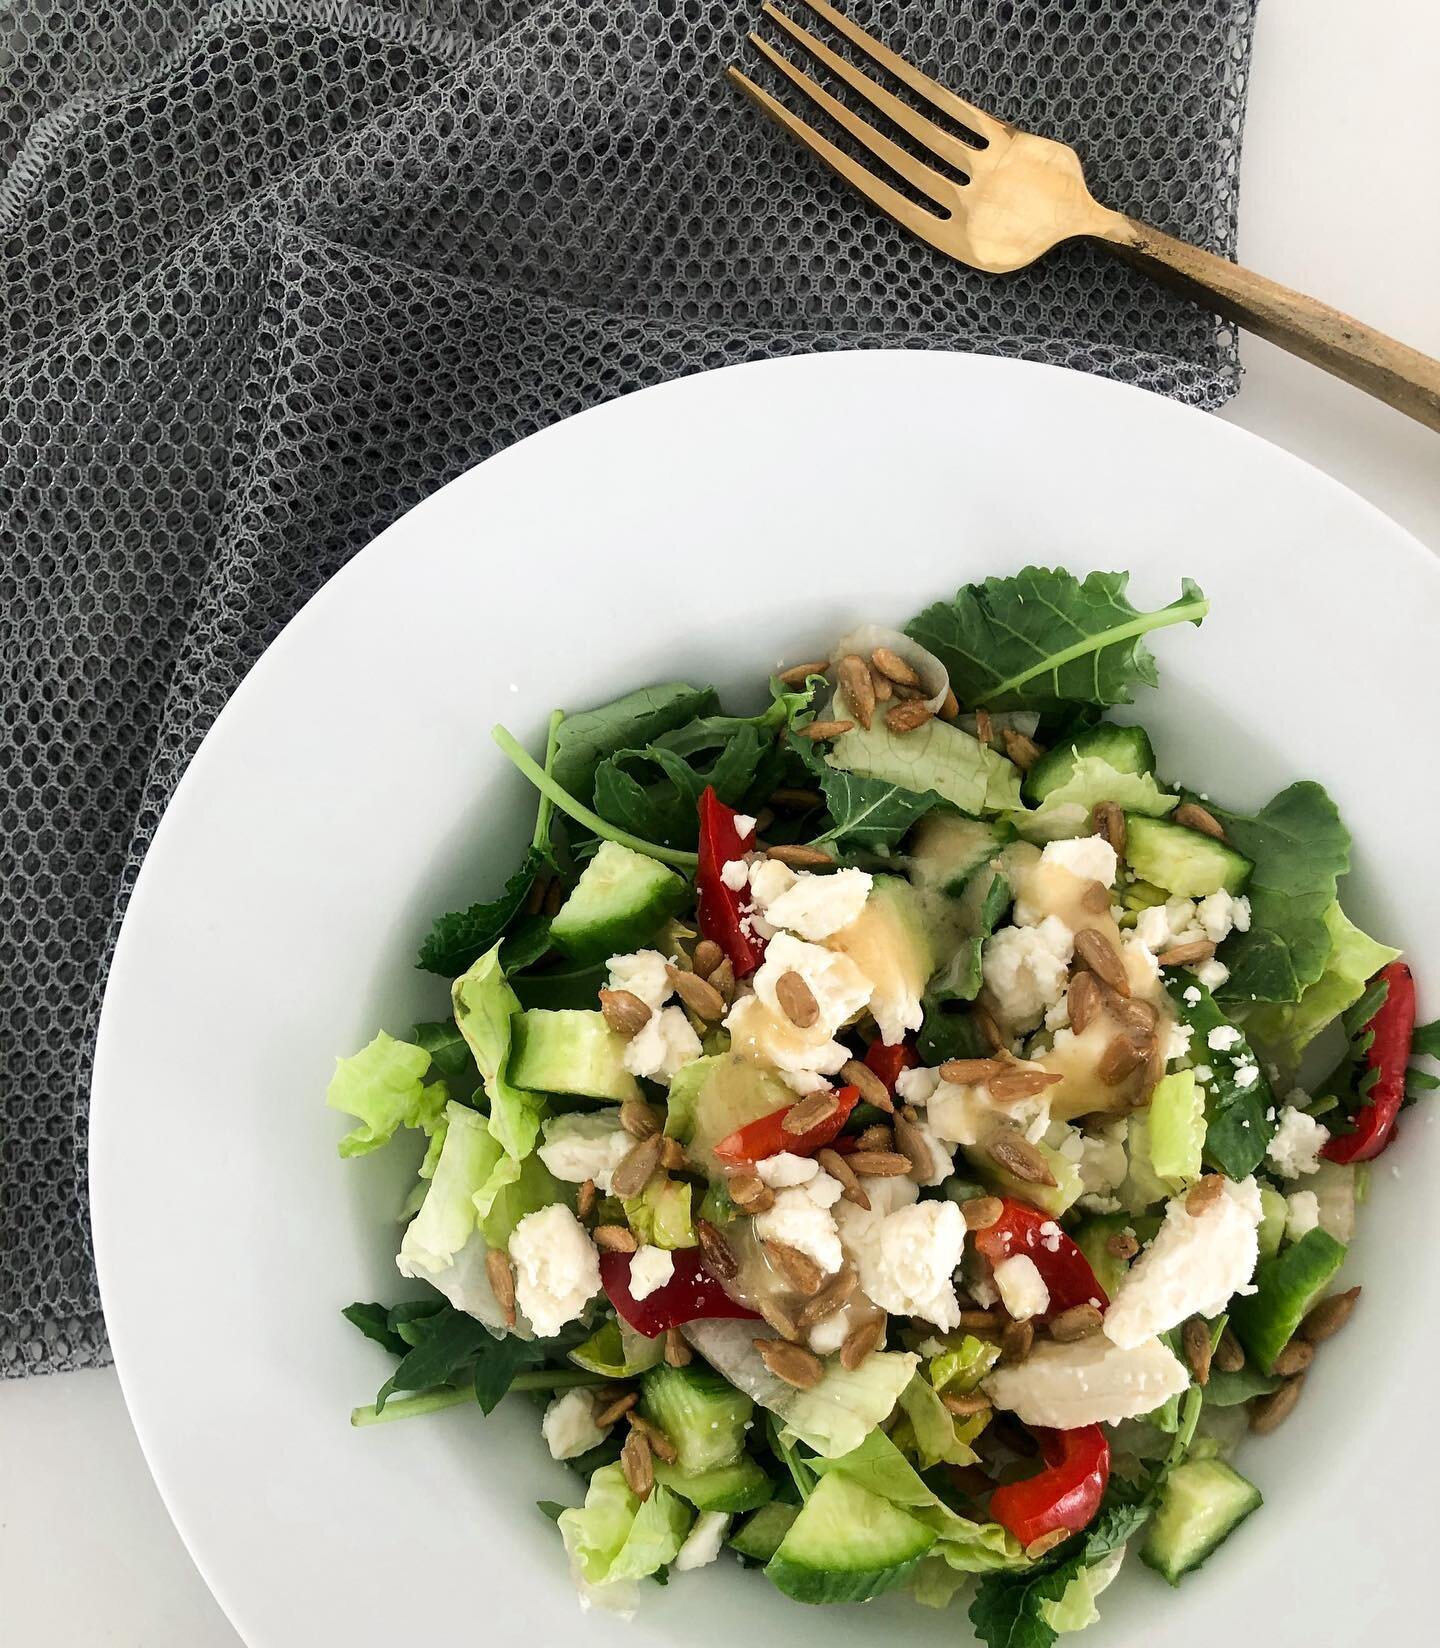 Build a Better Salad🥗&mdash;SAVE this post for your next salad! You can use these ideas to easily create a more nutritious + satisfying salad bowl! Drop your favorite salad combo in the comments🔽

Leafy Greens🥬
-Romaine Lettuce
-Butter Lettuce
-Ic